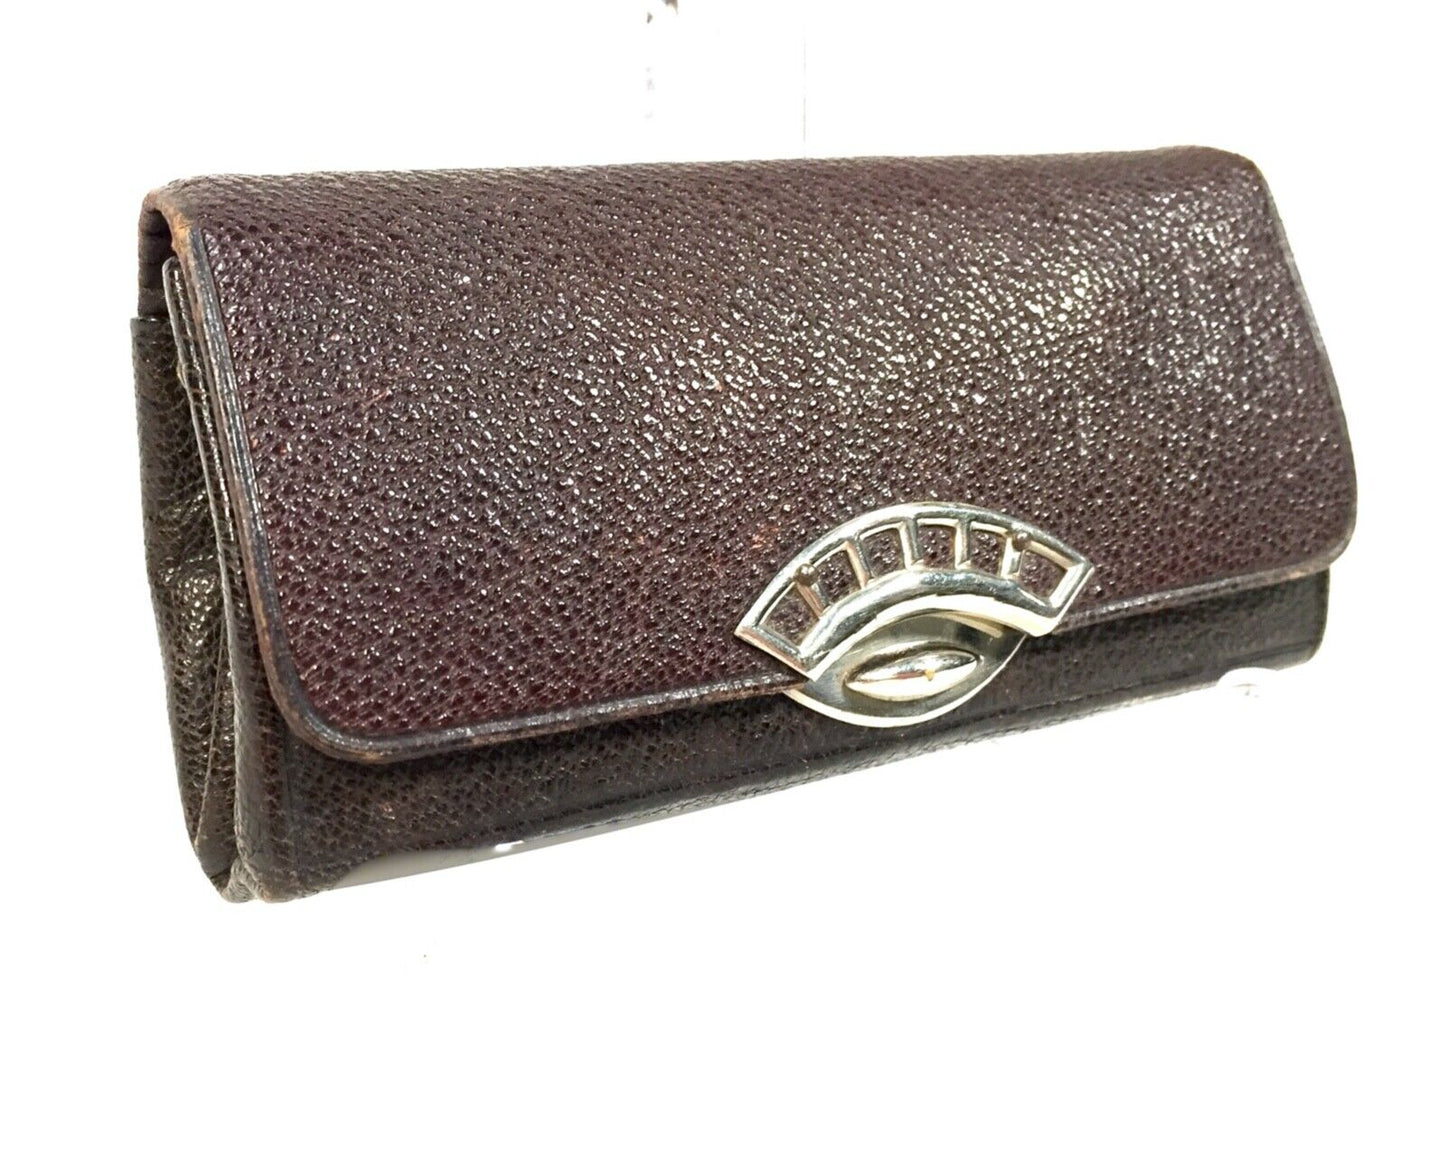 Antique Edwardian Leather Maroon / Brown Purse Wallet / Vintage Clothing c.1910.